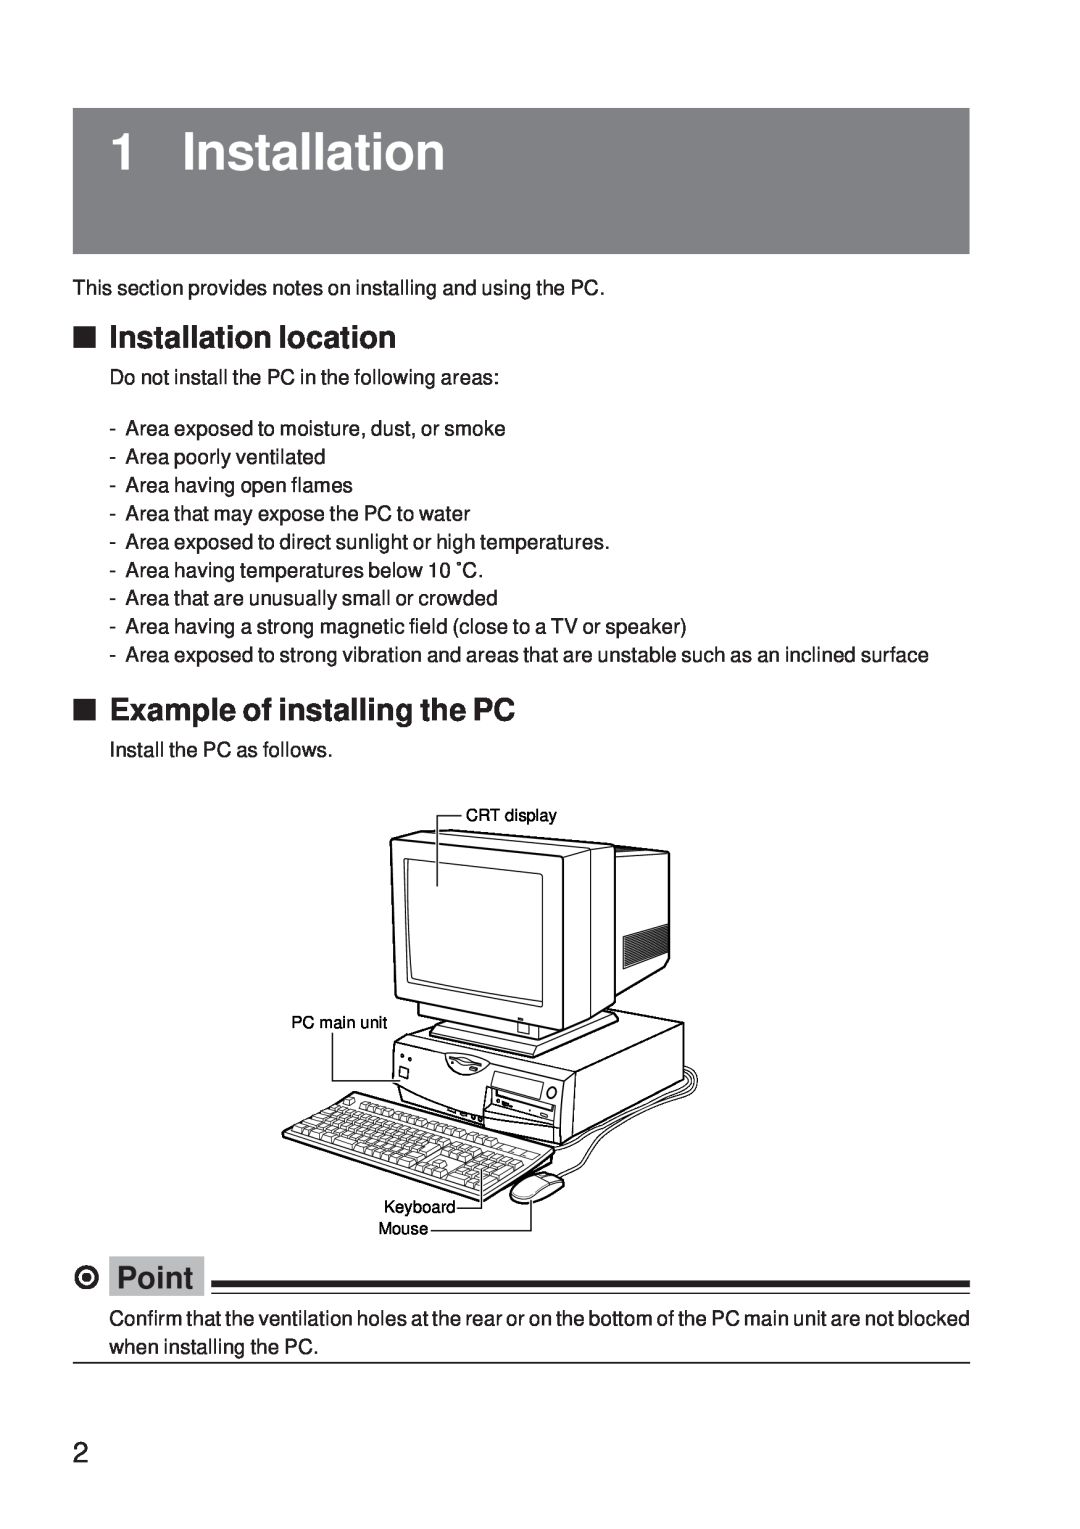 Fujitsu 5000 user manual Installation location, Example of installing the PC, ⁄ Point 